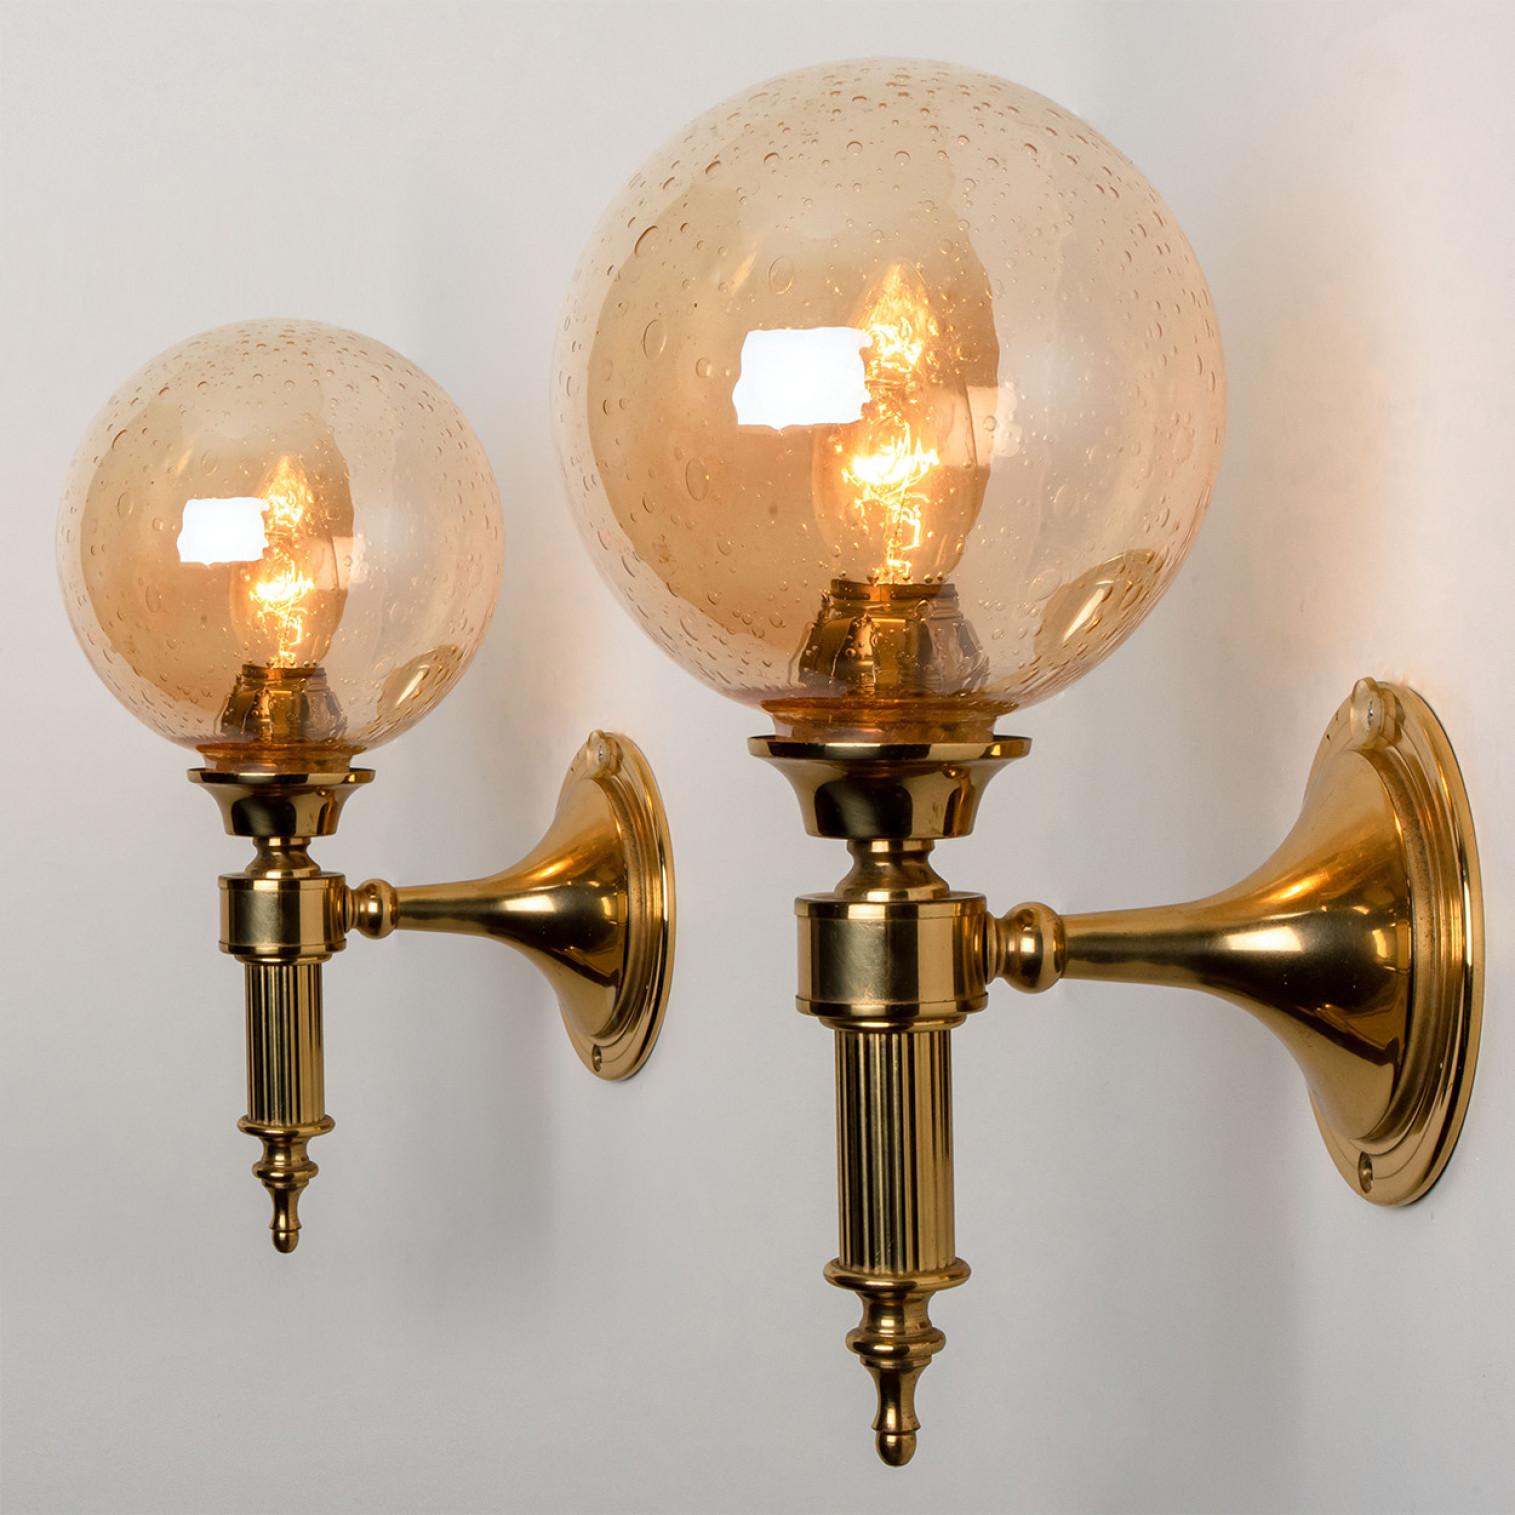 Amber Glass and Brass Wall Lamps in the Style of Glashütte Limburg, 1975 In Good Condition For Sale In Rijssen, NL